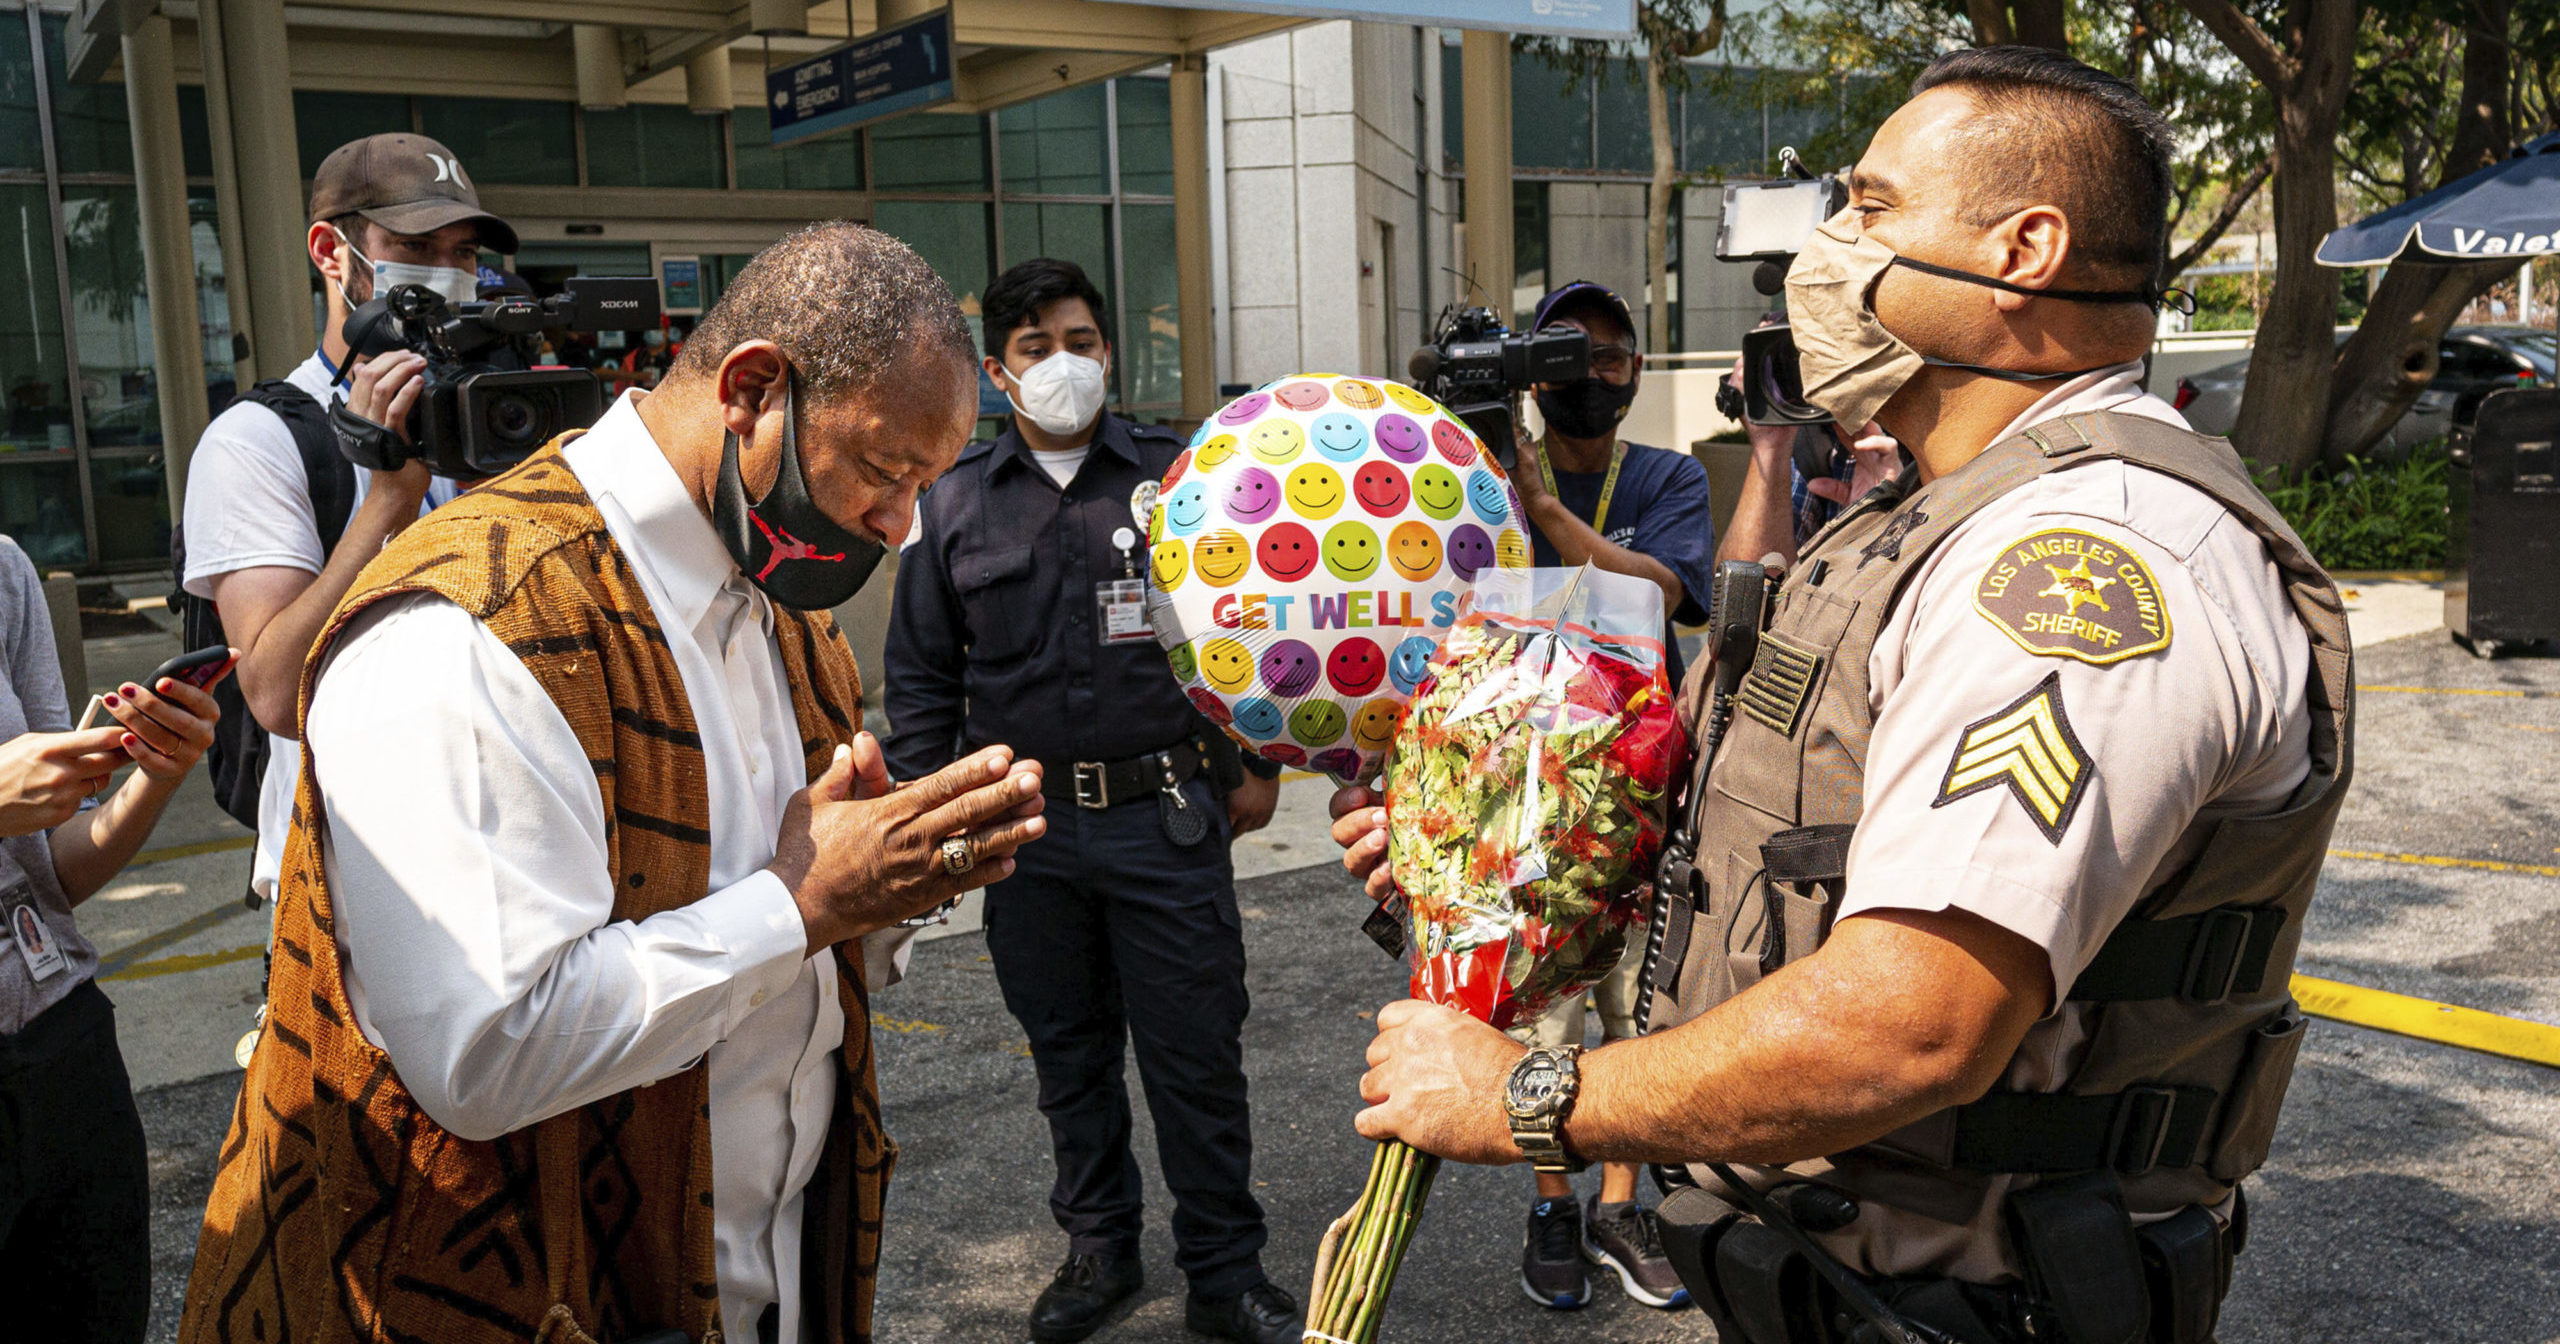 Najee Ali of Project Islamic Hope presents Sgt. Larry Villareal of the Los Angeles County Sheriff's Department flowers for deputies recovering at St. Francis Medical Center in Lynwood, California, on Sept. 14, 2020. The two deputies were shot Sept. 12 while in their patrol vehicle in an ambush attack.